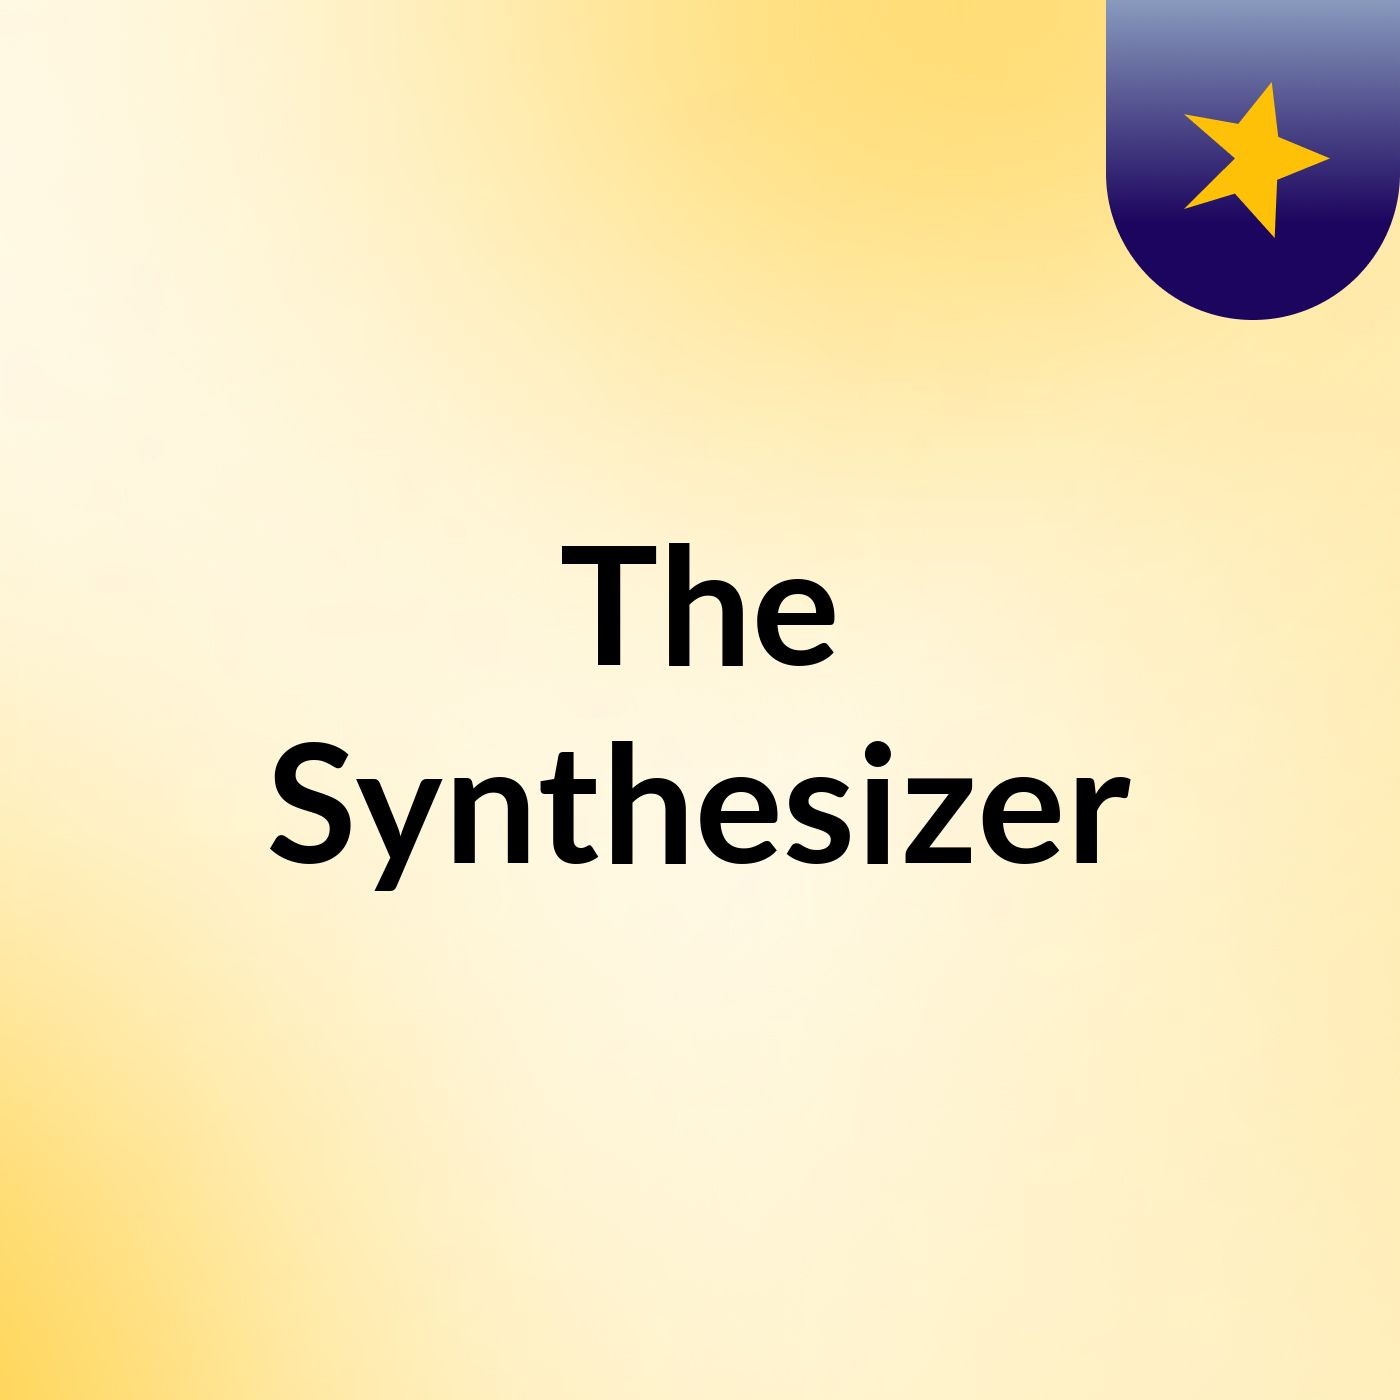 The Synthesizer